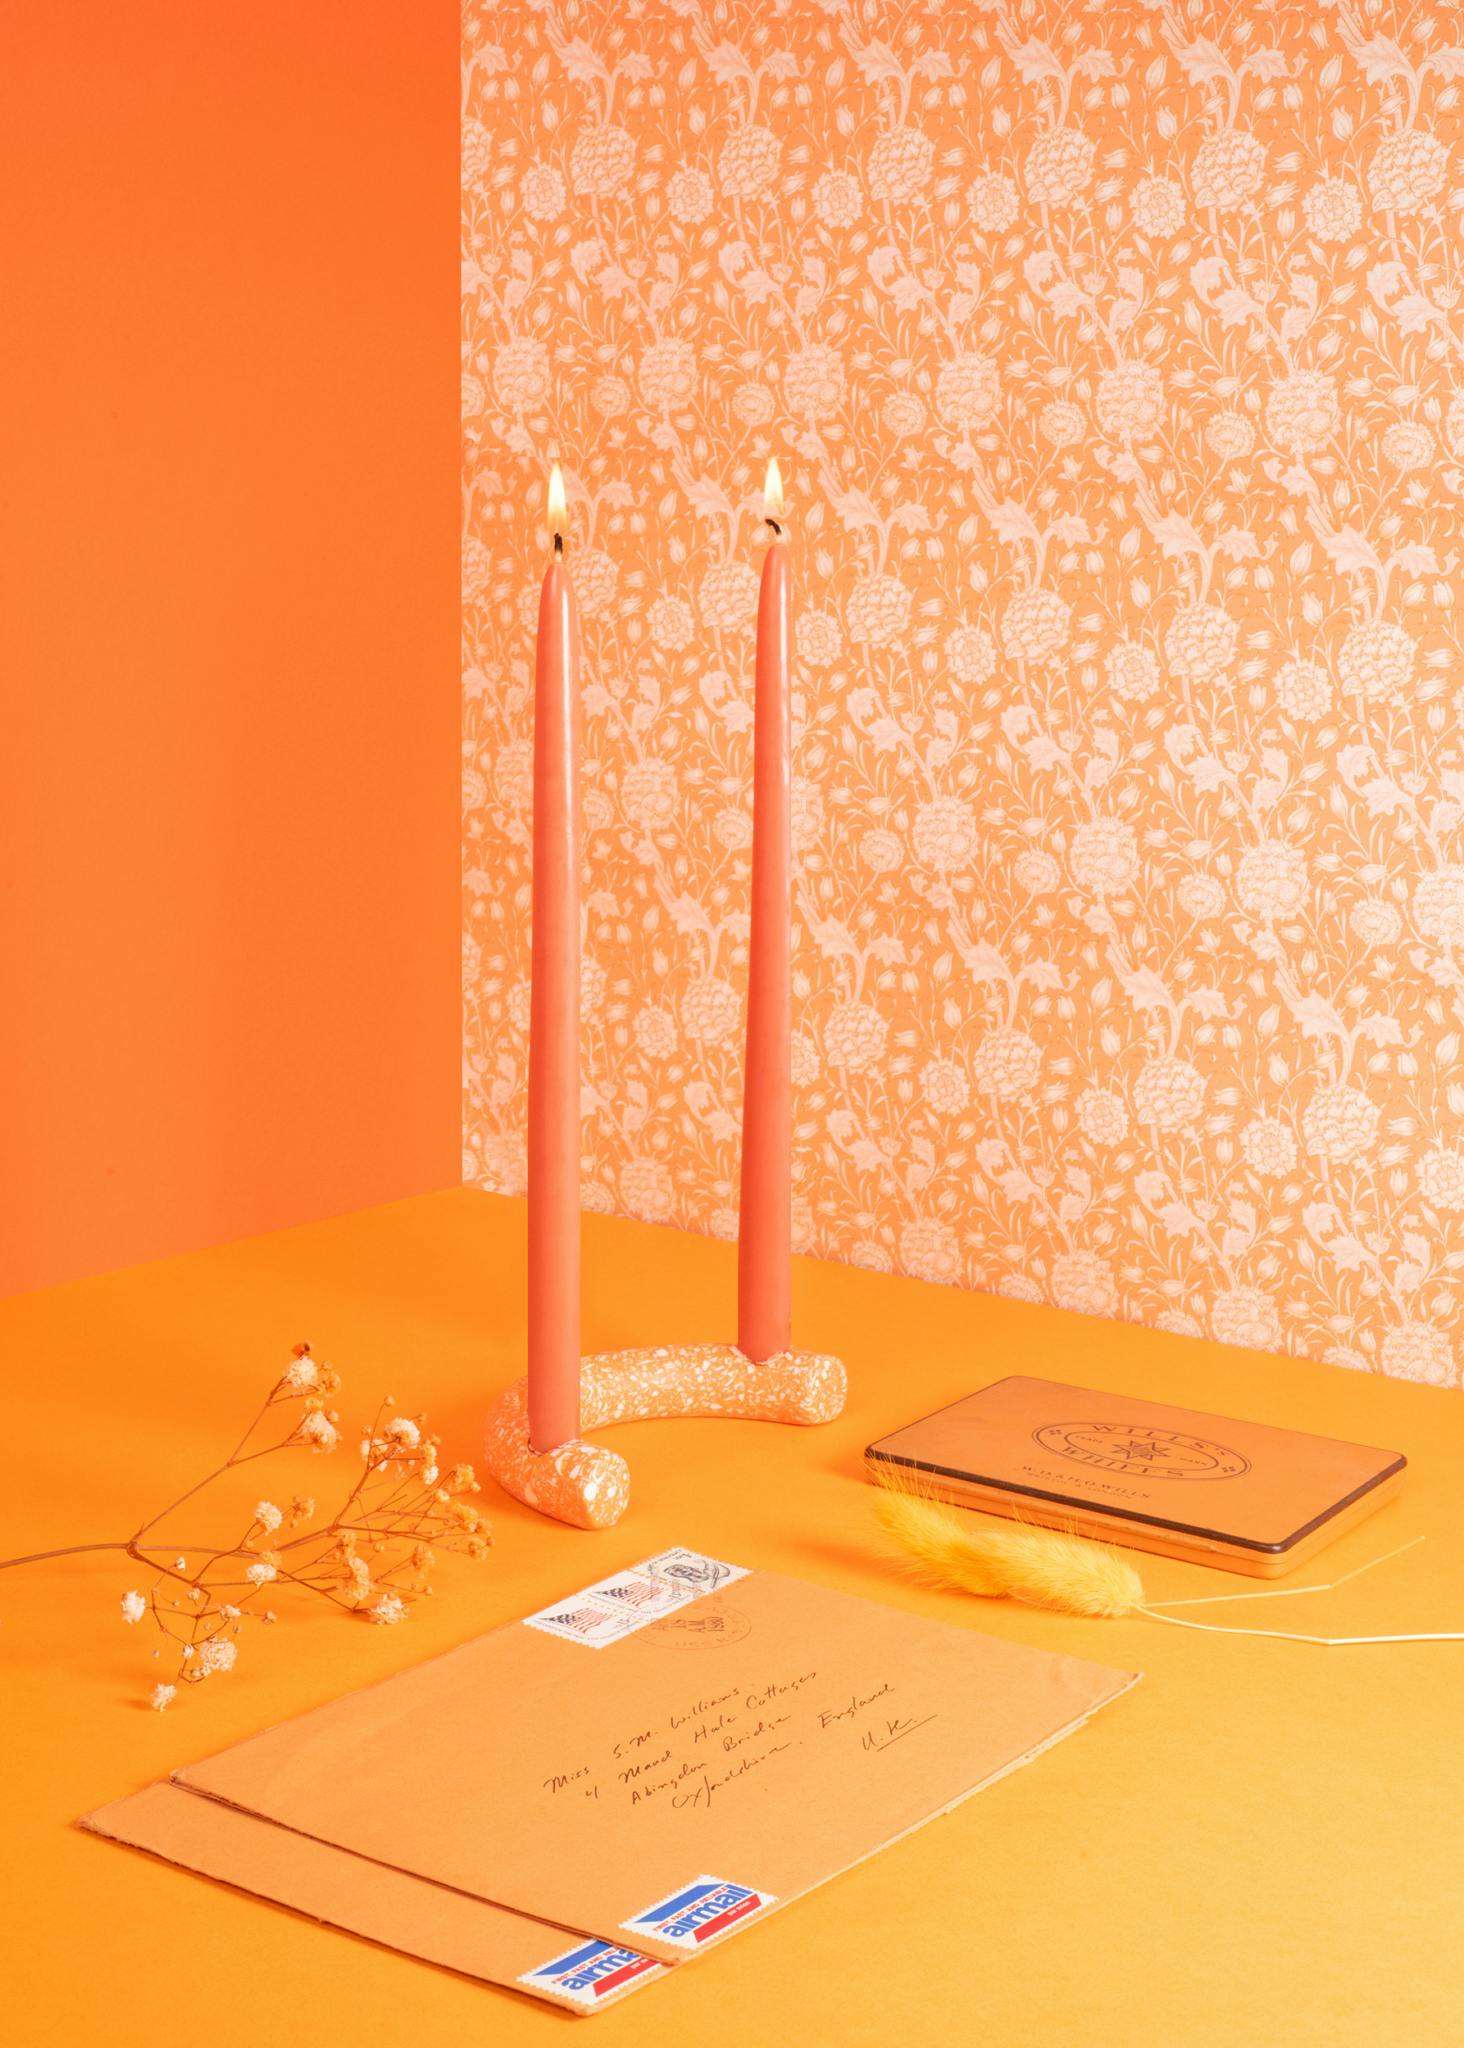 Image shows a room coloured with similar shades of orange with orange objects in the foreground including letters, candles and a feather